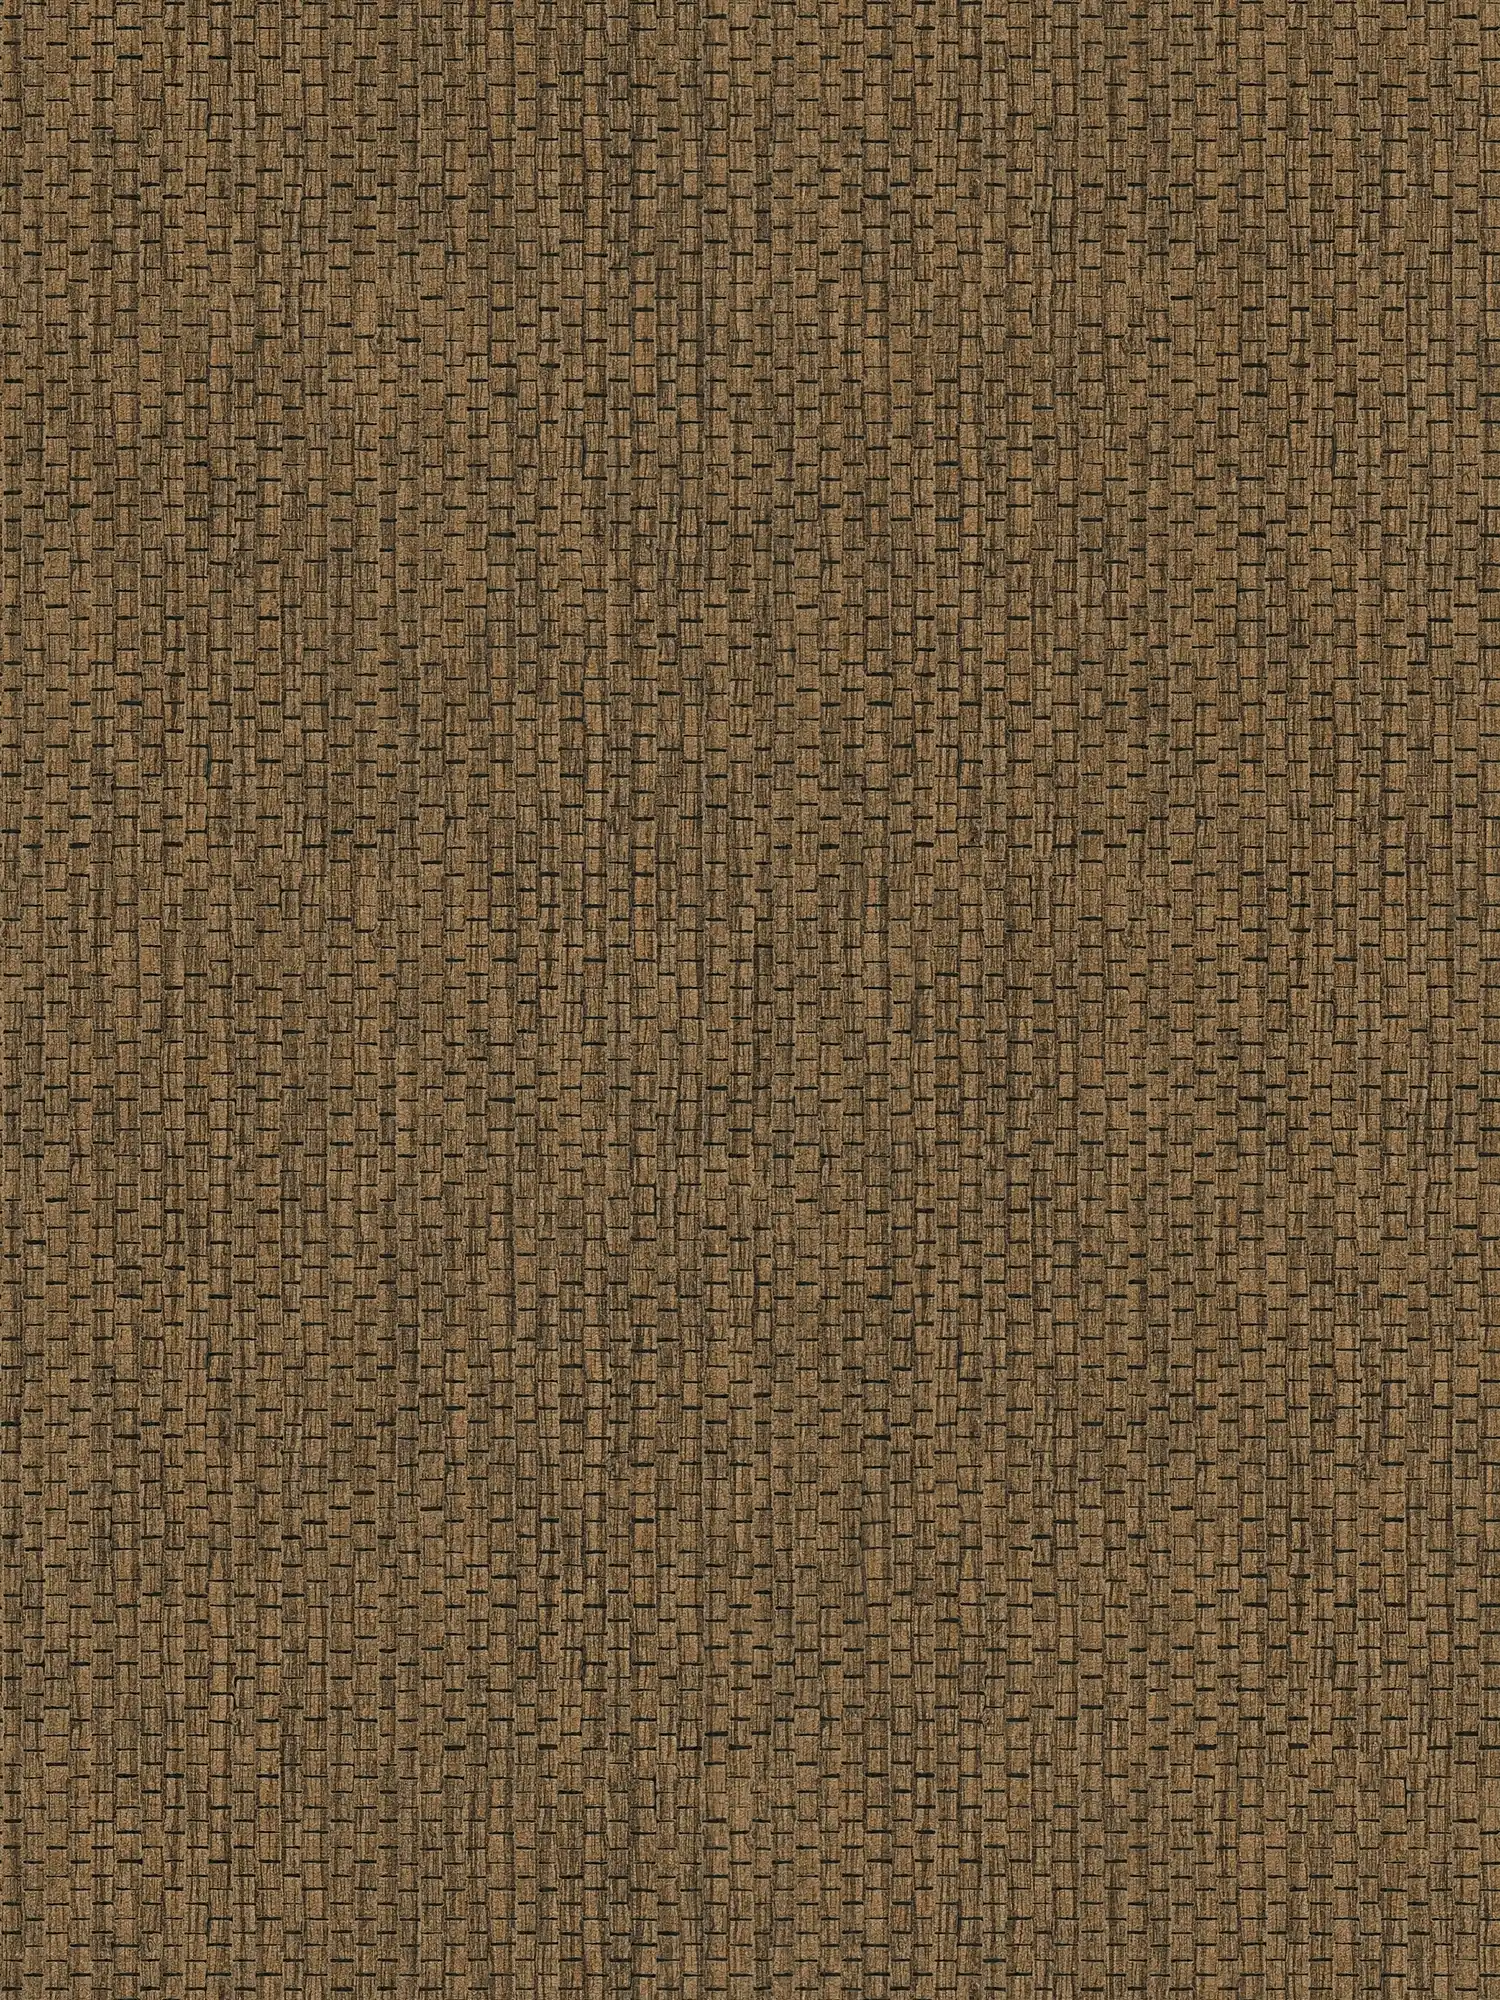 Wallpaper with raffia natural fabric pattern - Brown
